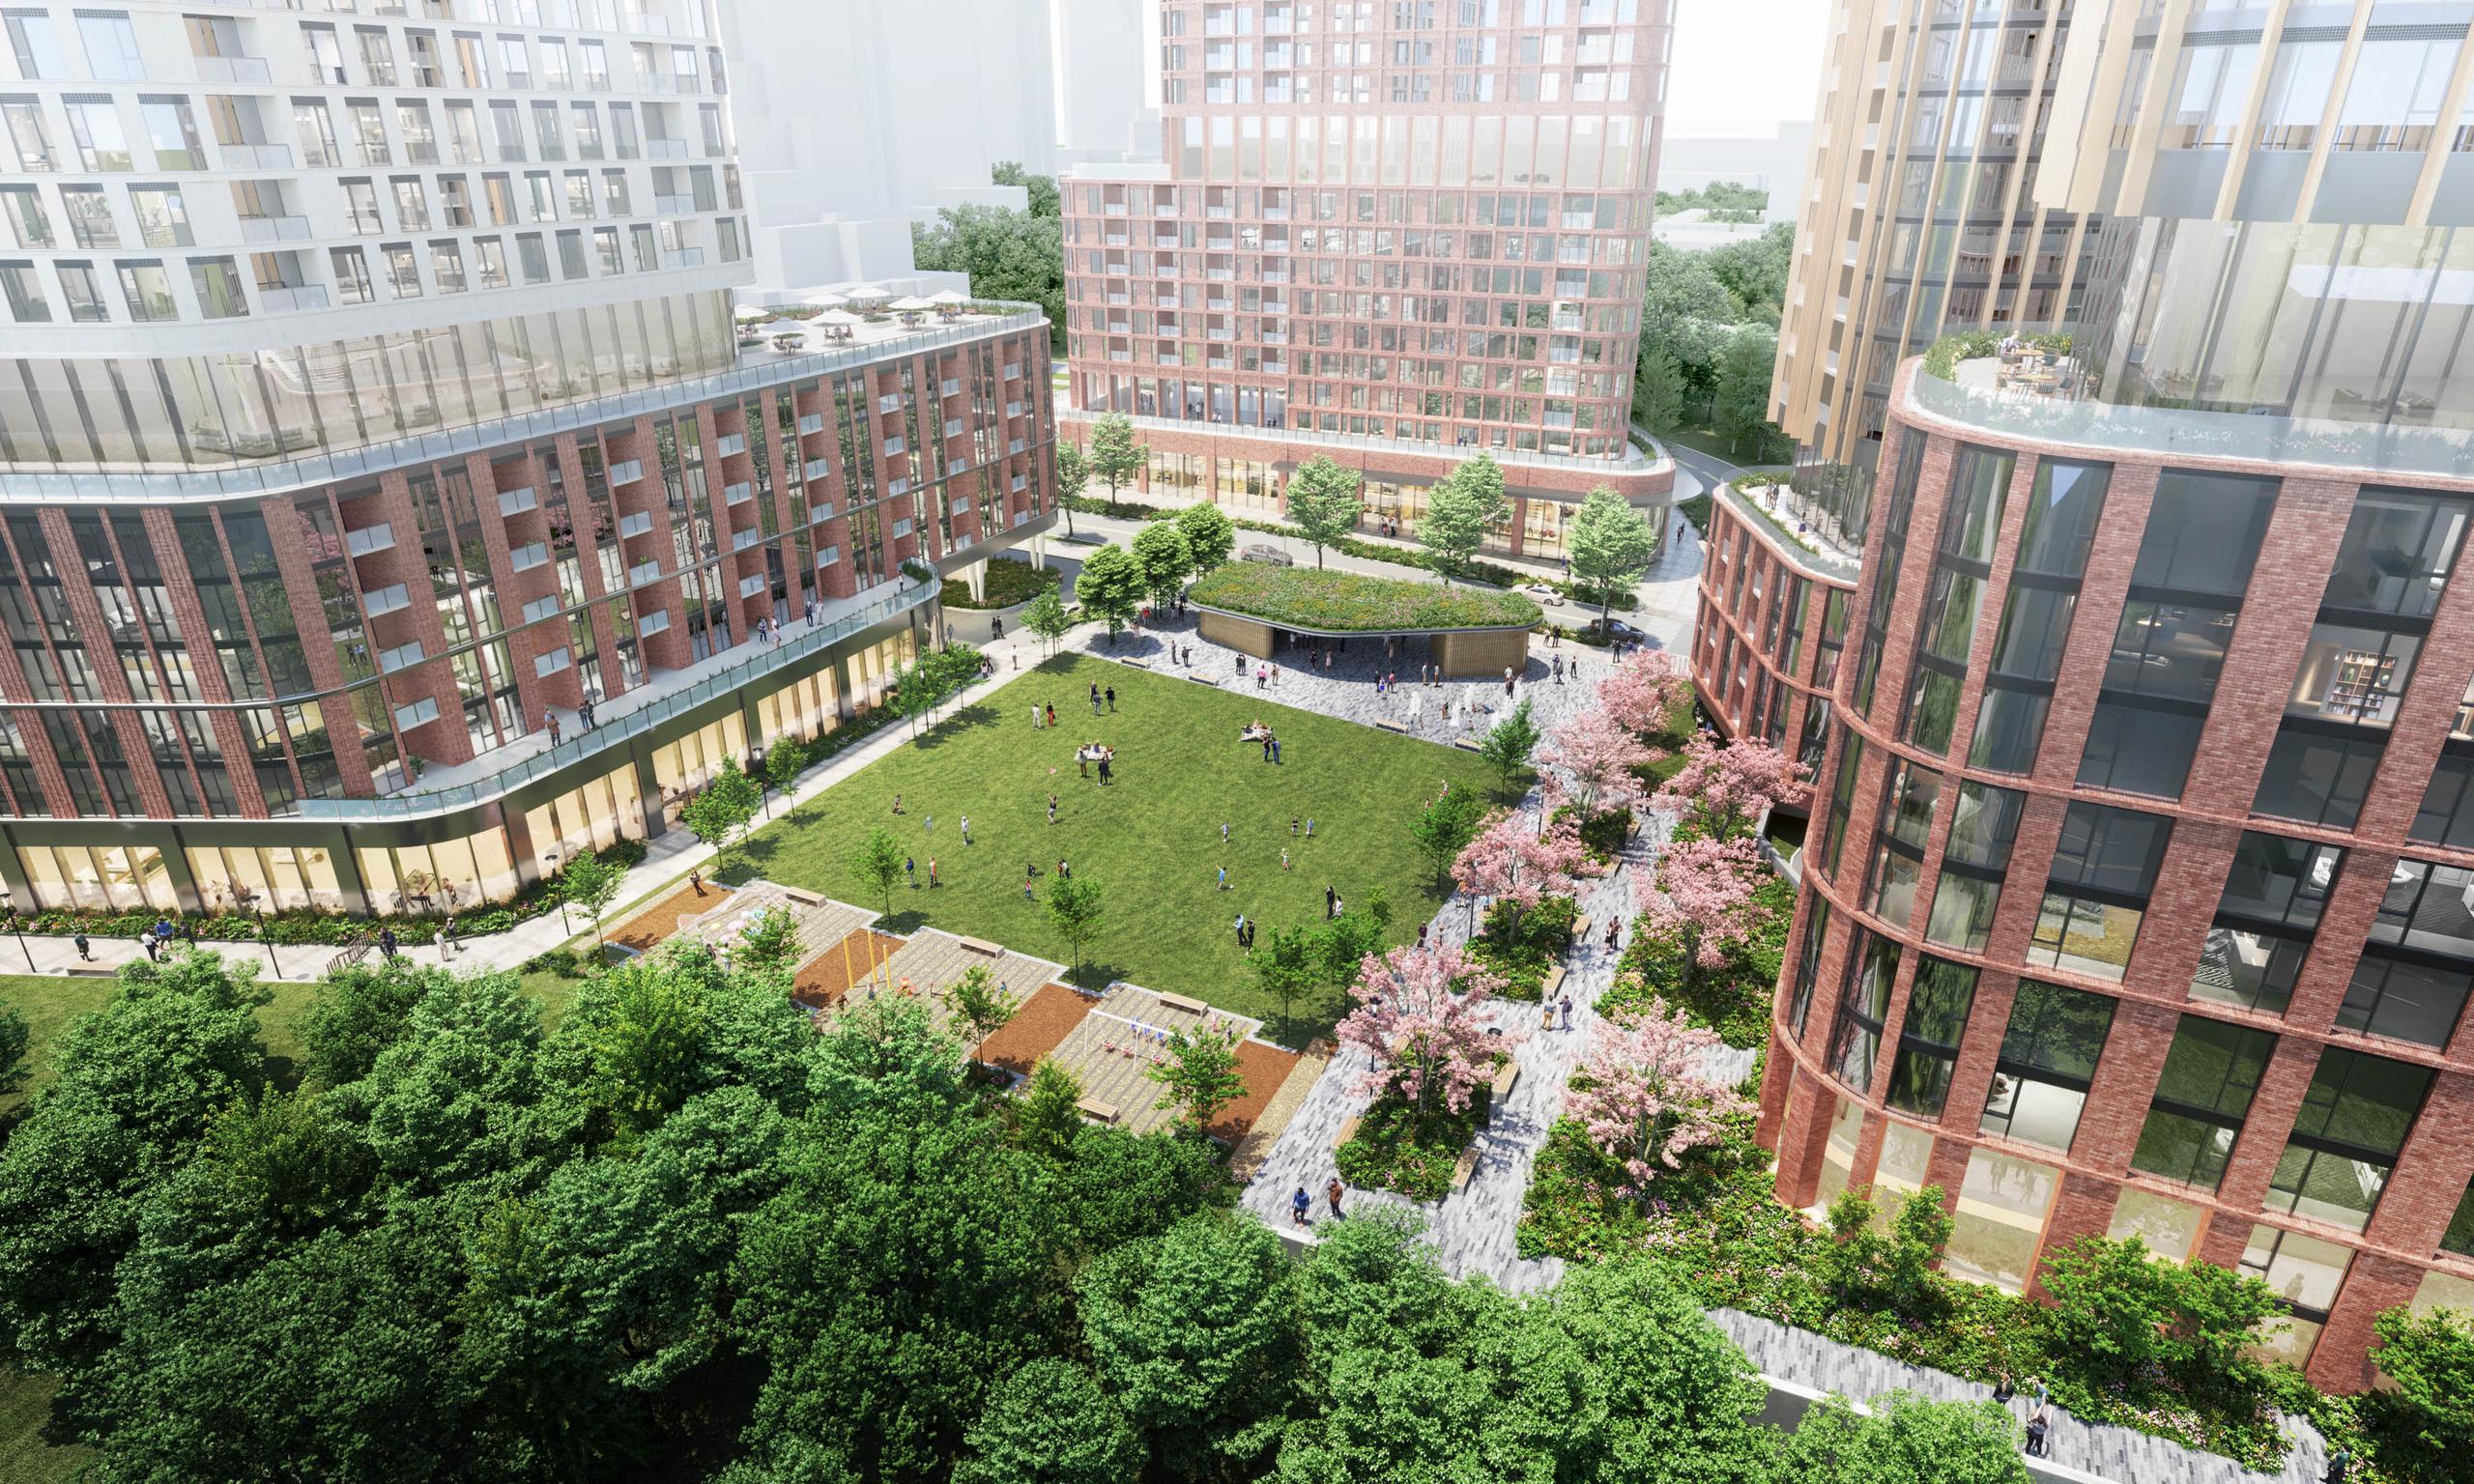 Birdseye view rendering of Eglinton and Leslie courtyard and park space